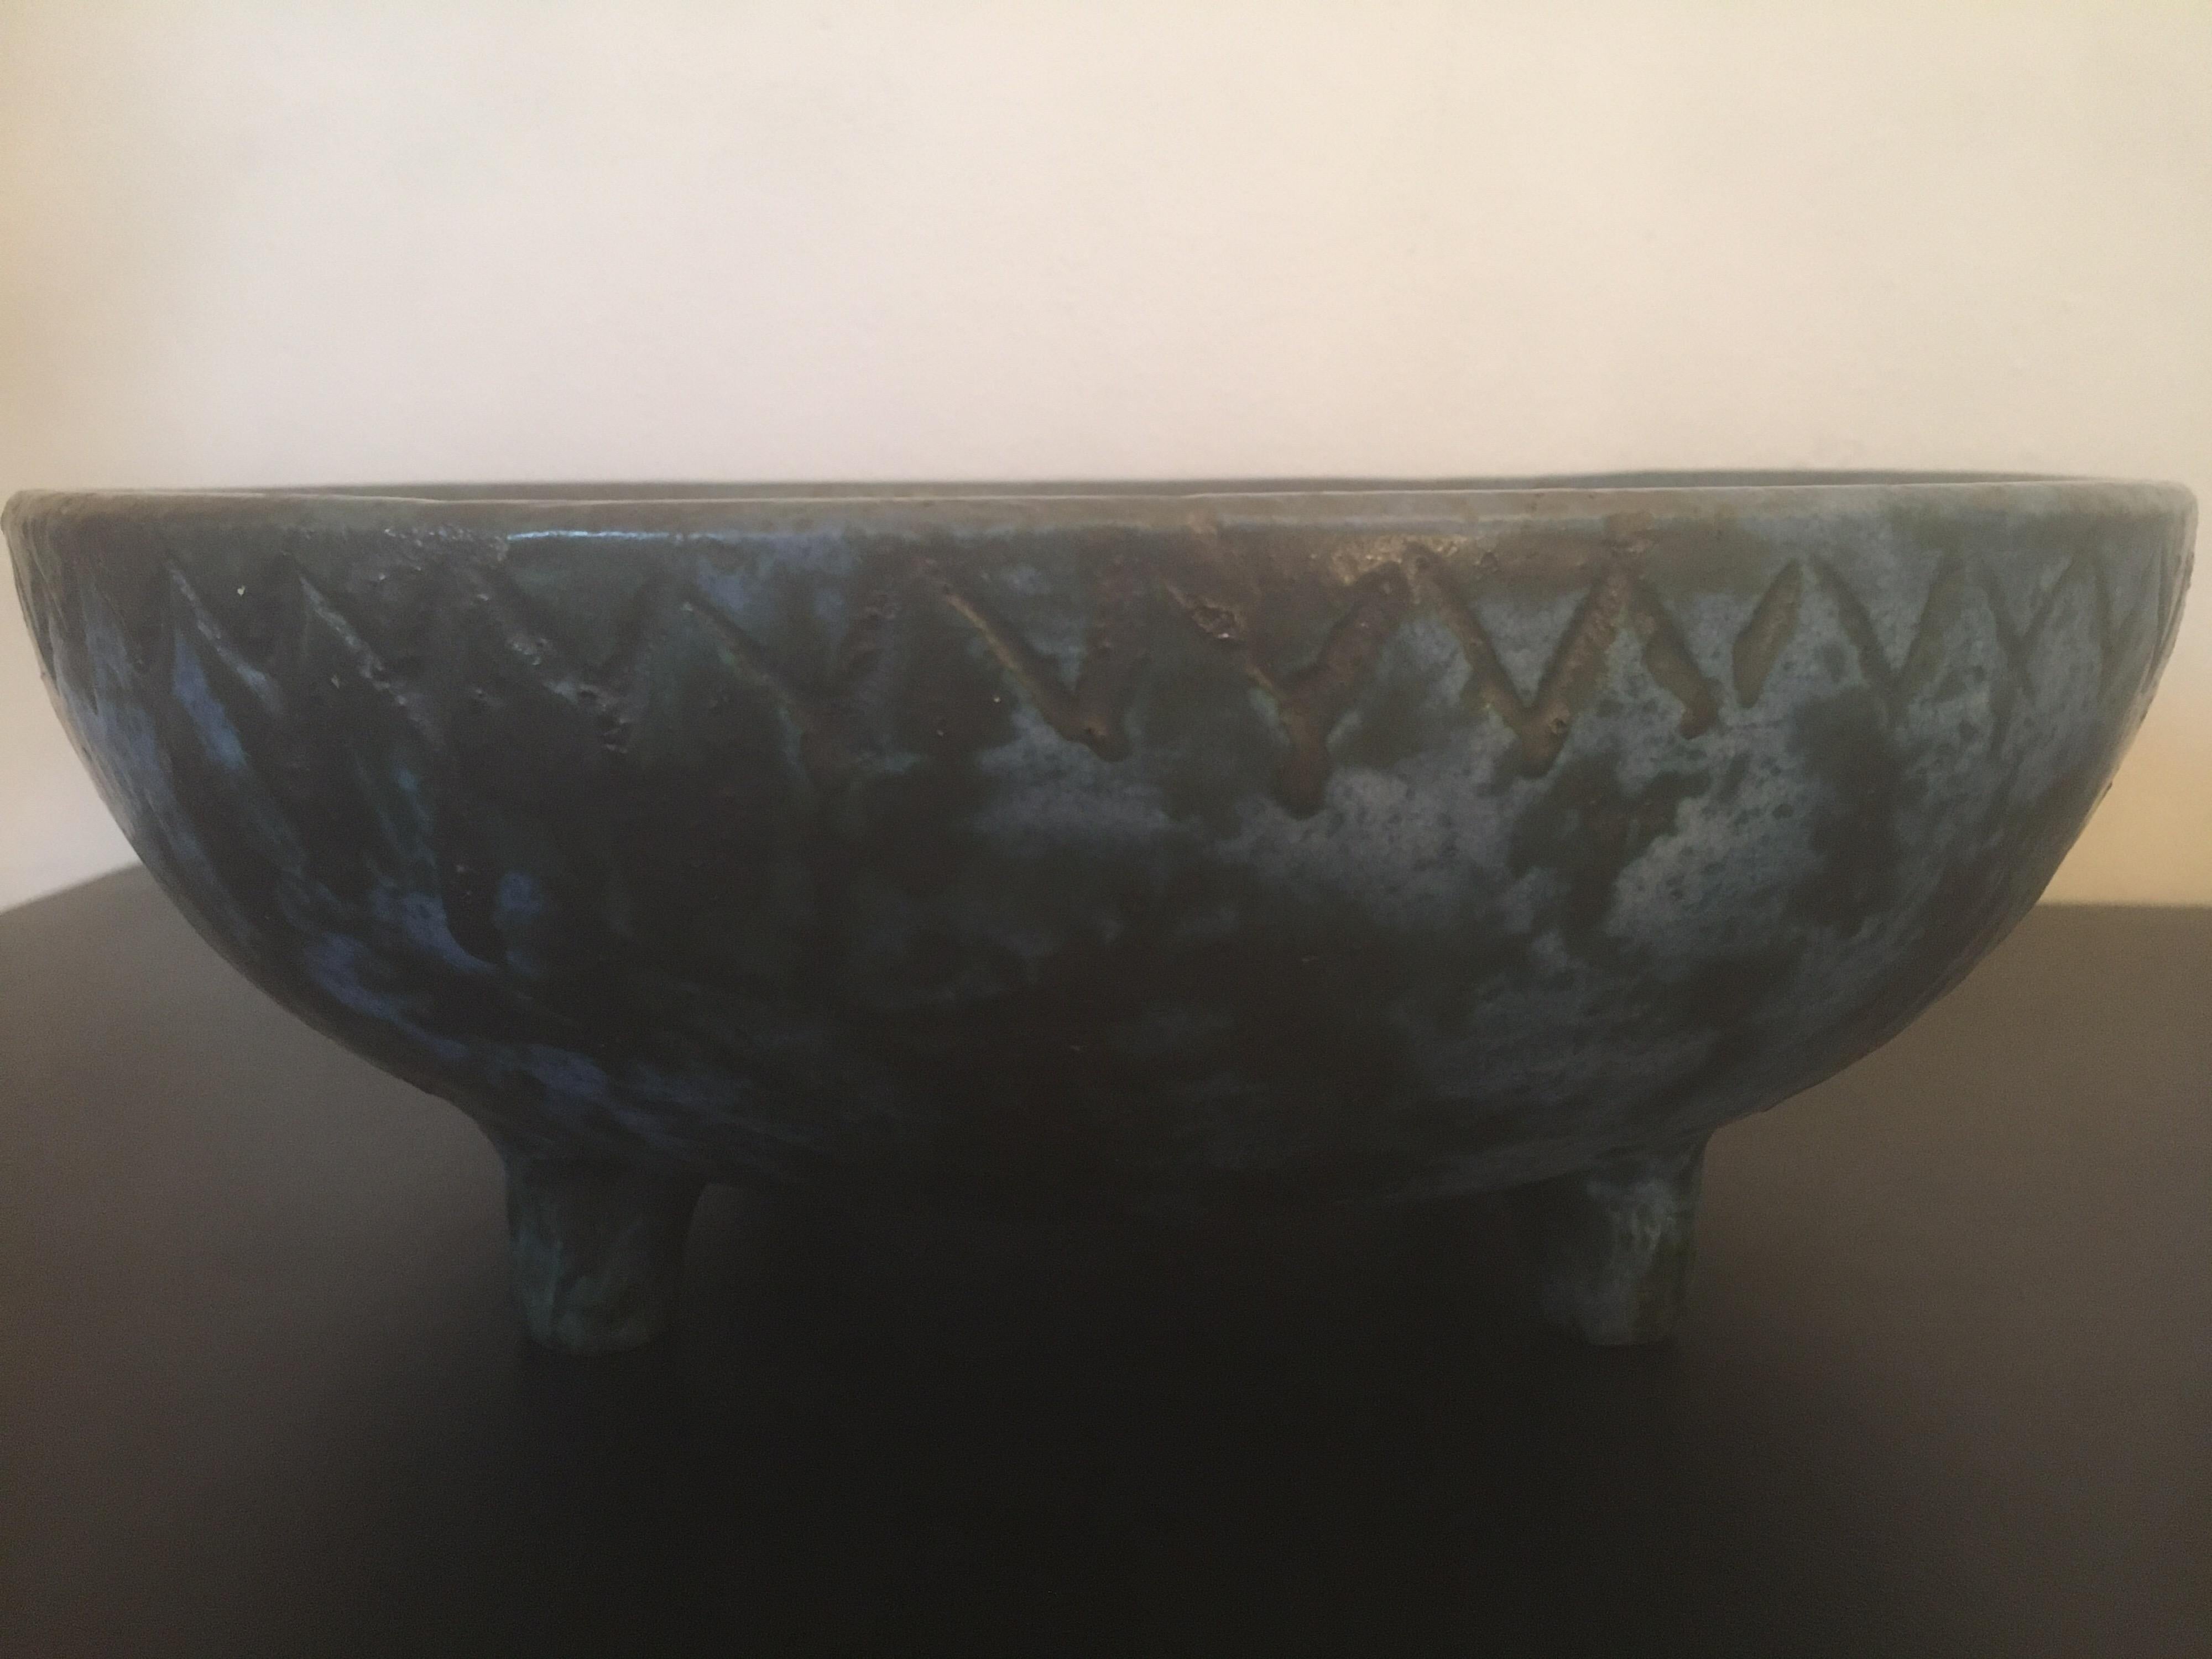 Glazed Jacques Blin Signed Blue Ceramic Bowl on Four Feet, Incised Decor, French, 1960s For Sale